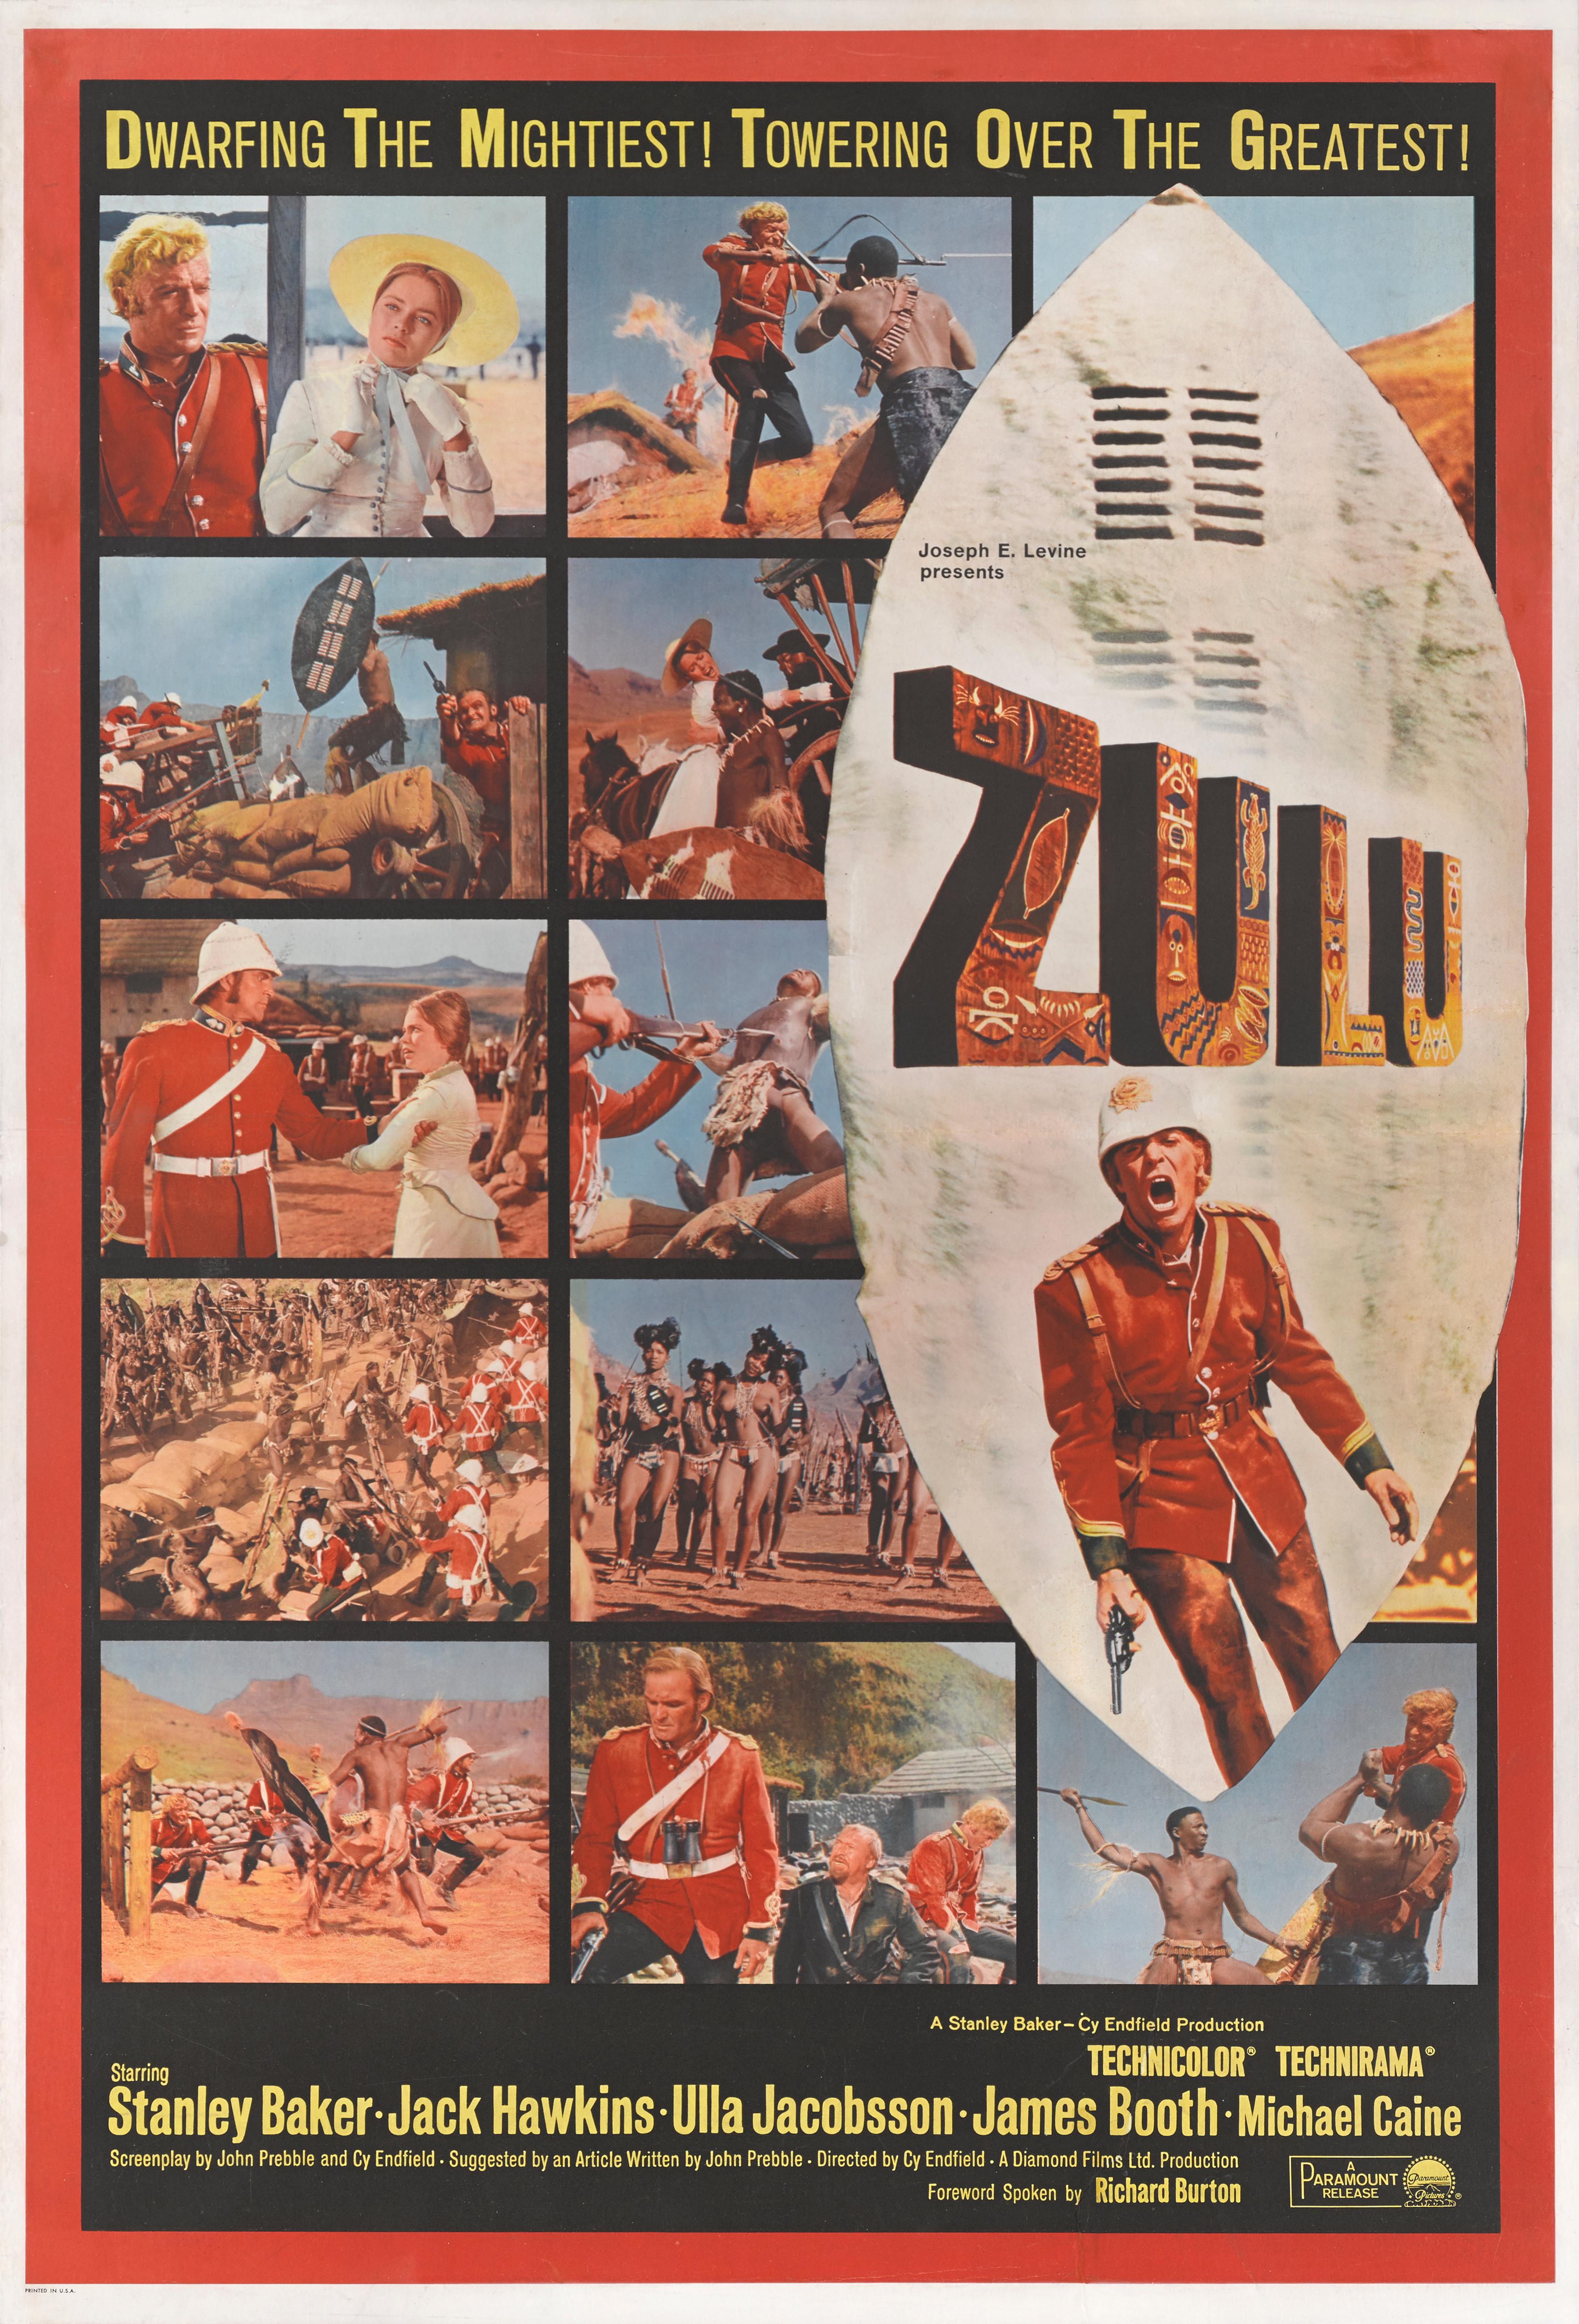 Original US special style movie poster used in the cinemars that premiered the film in1964. This Zulu poster is the only one that shows these different scenes
from the film.